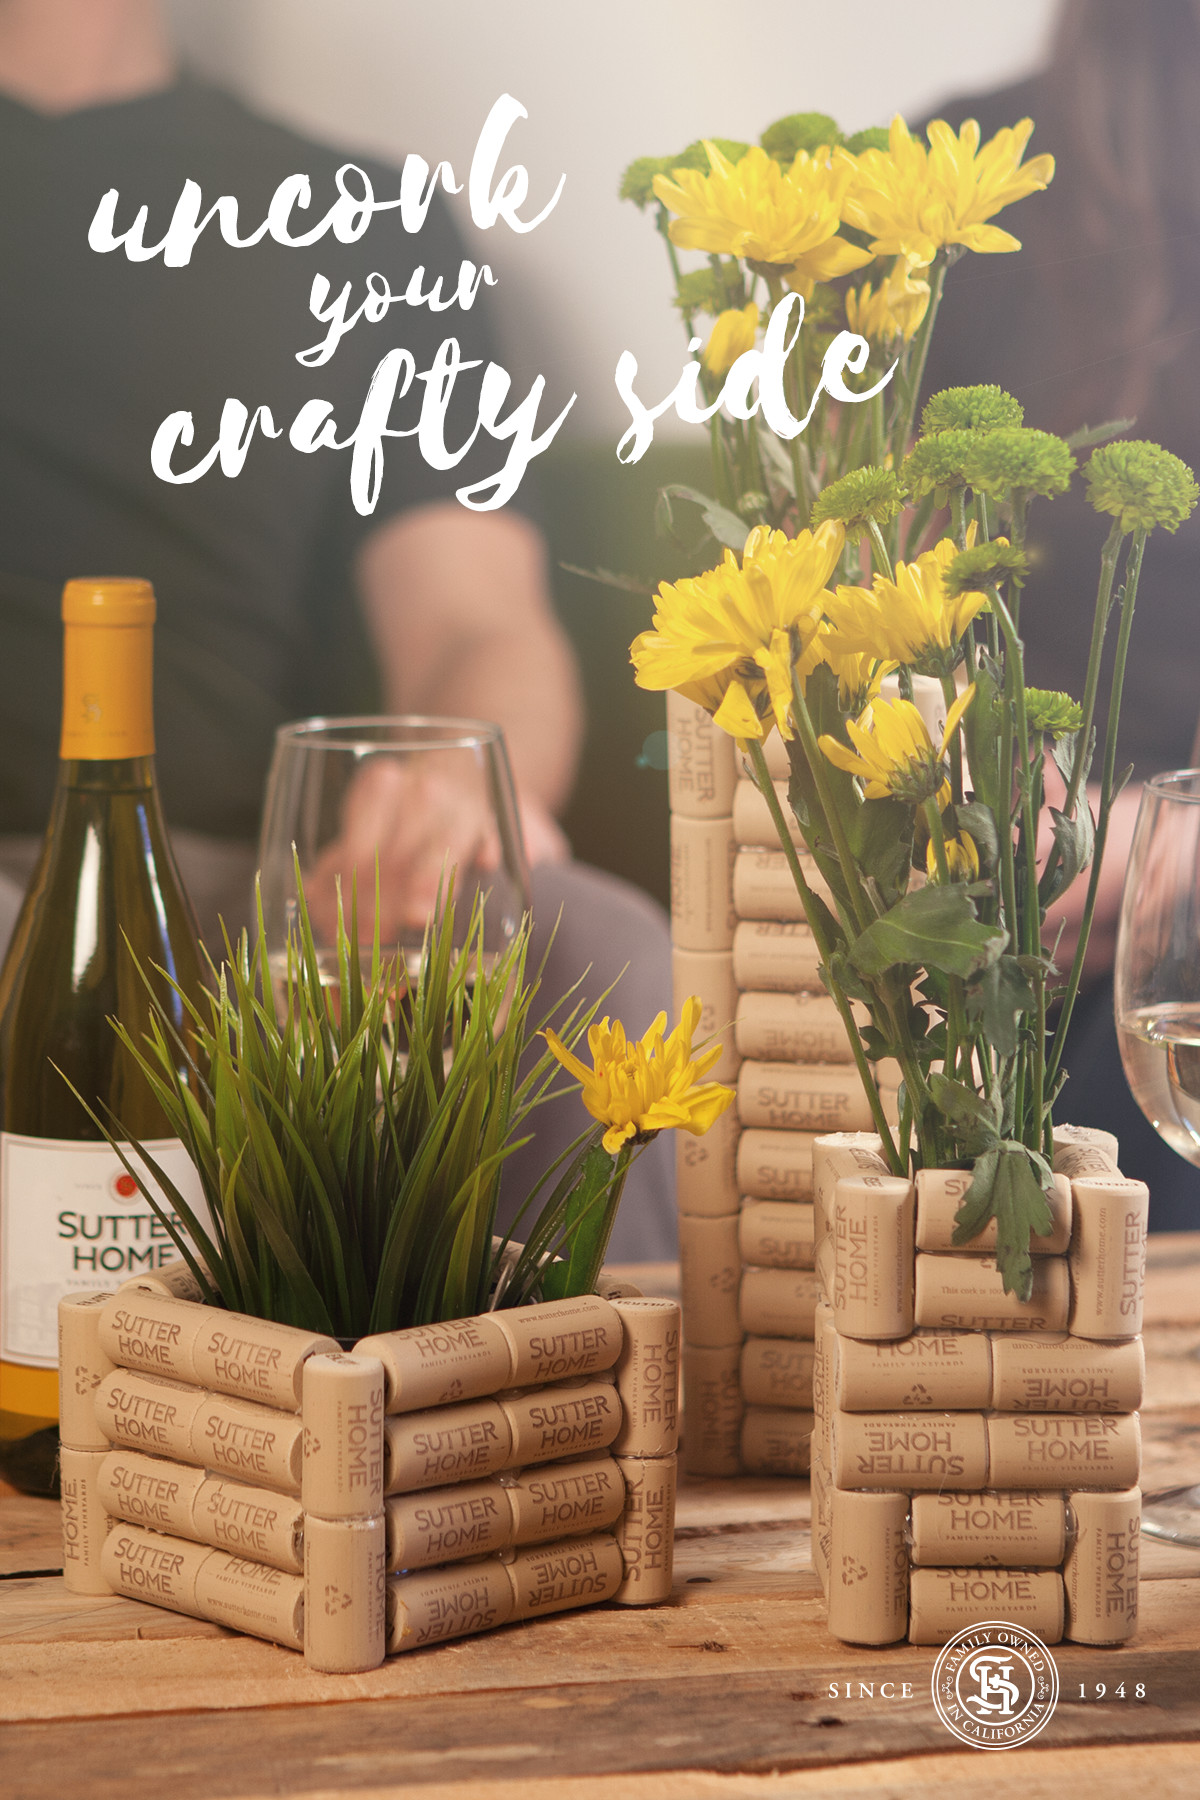 10 Trendy Glass Vase for Wine Corks 2024 free download glass vase for wine corks of do you collect wine corks try this diy vase wine diy pinterest regarding attention wine lovers collect sutter home wine corks and uncork your crafty side with